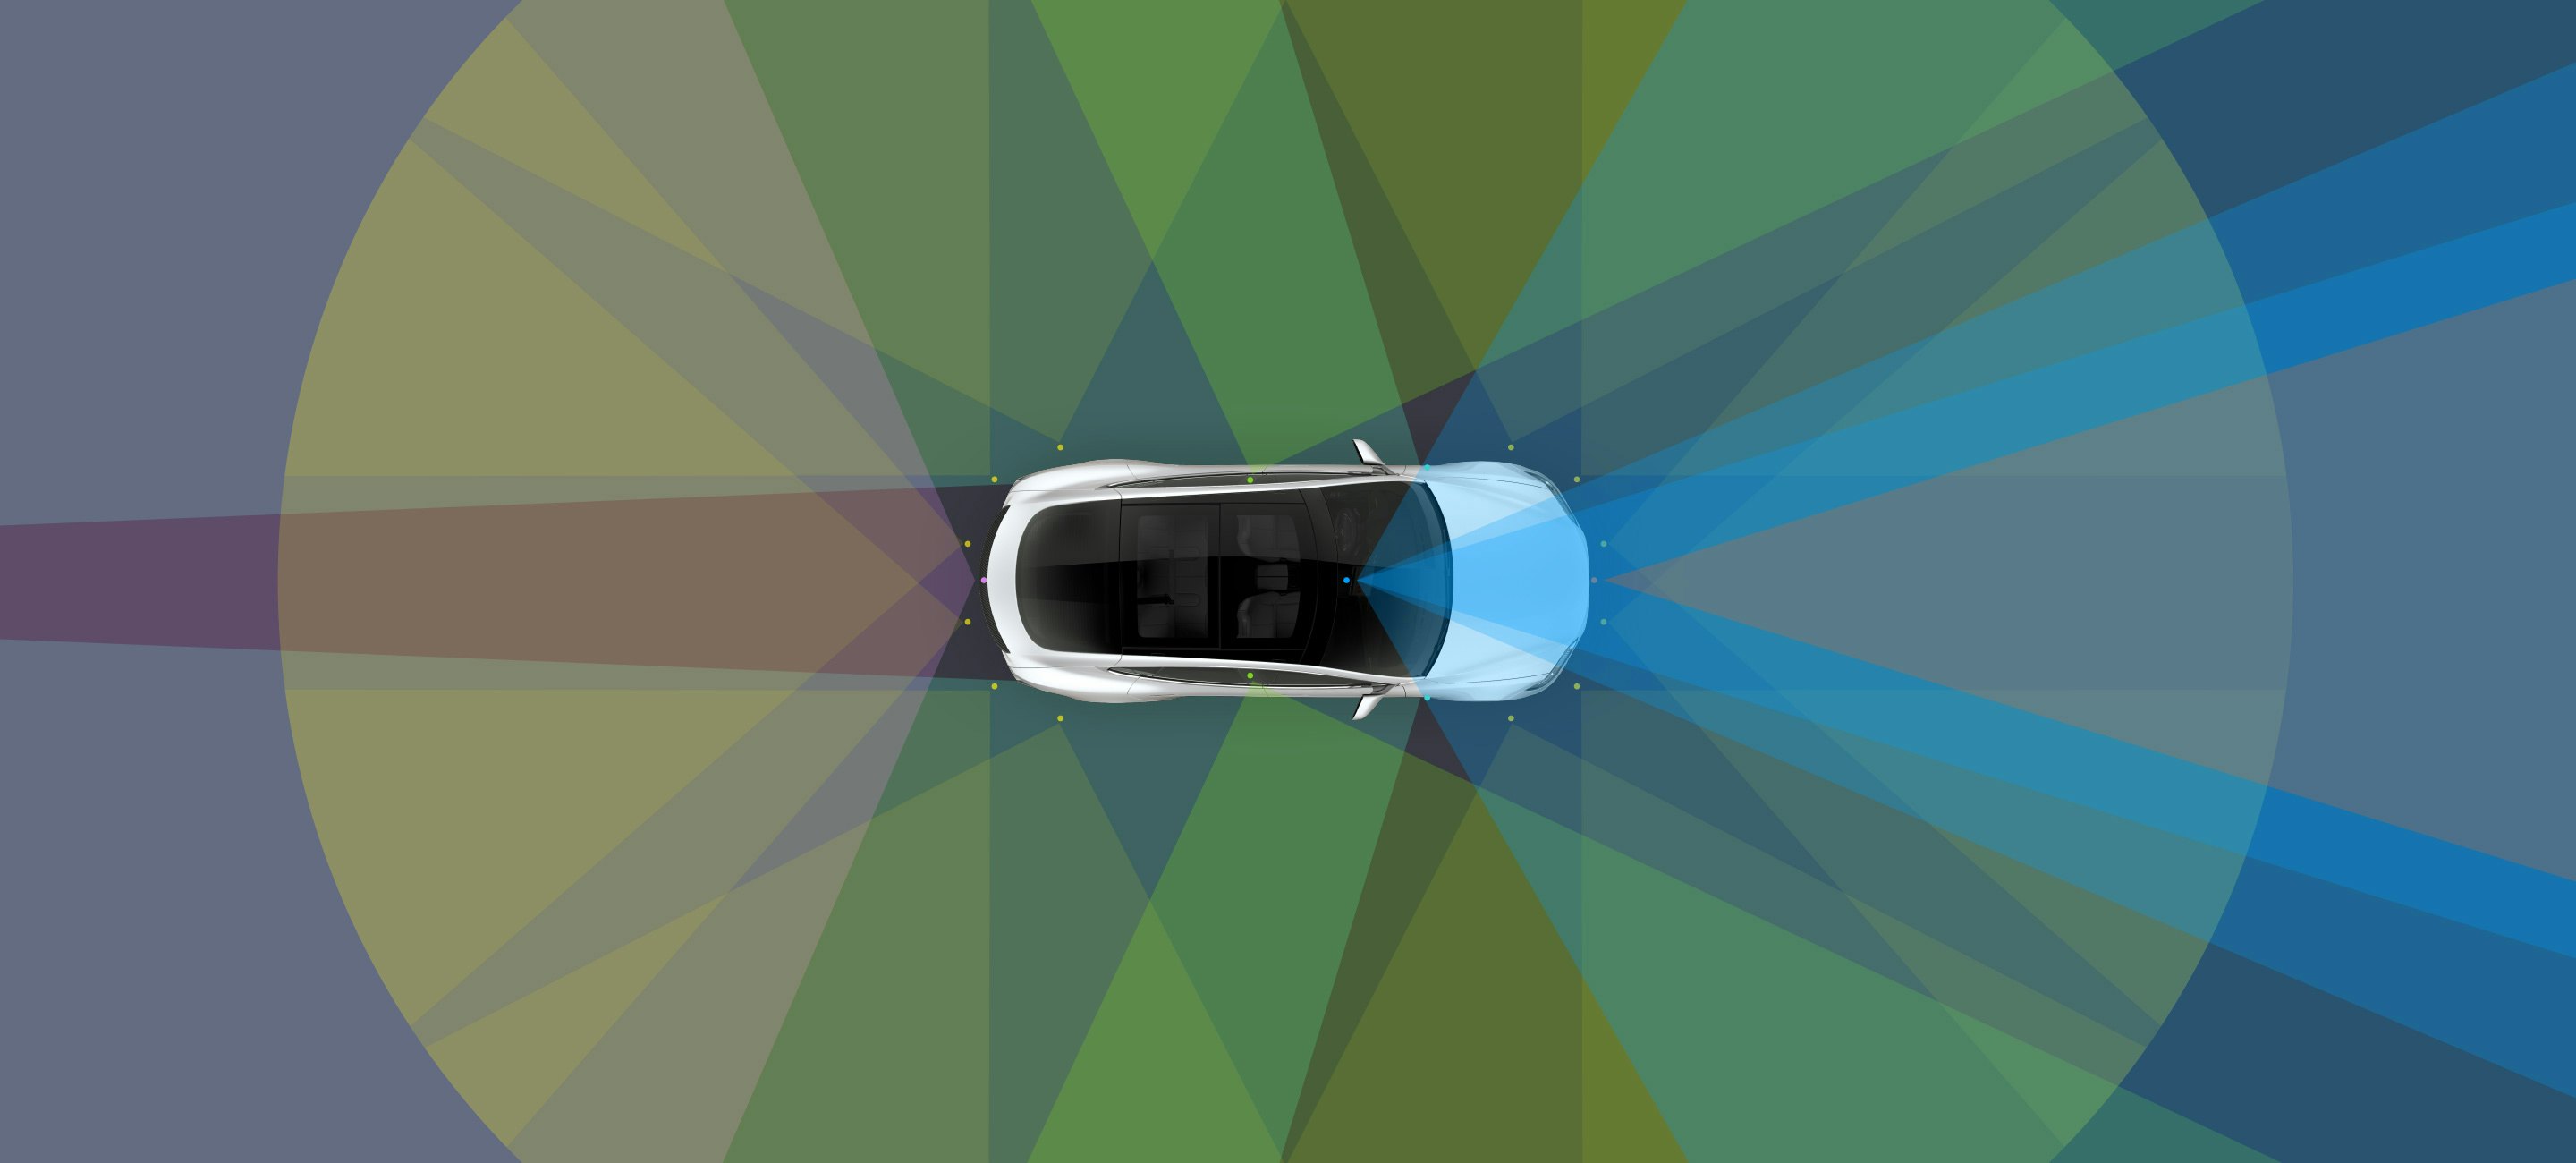 elon musk drops release date and specs of tesla full self driving a i chip